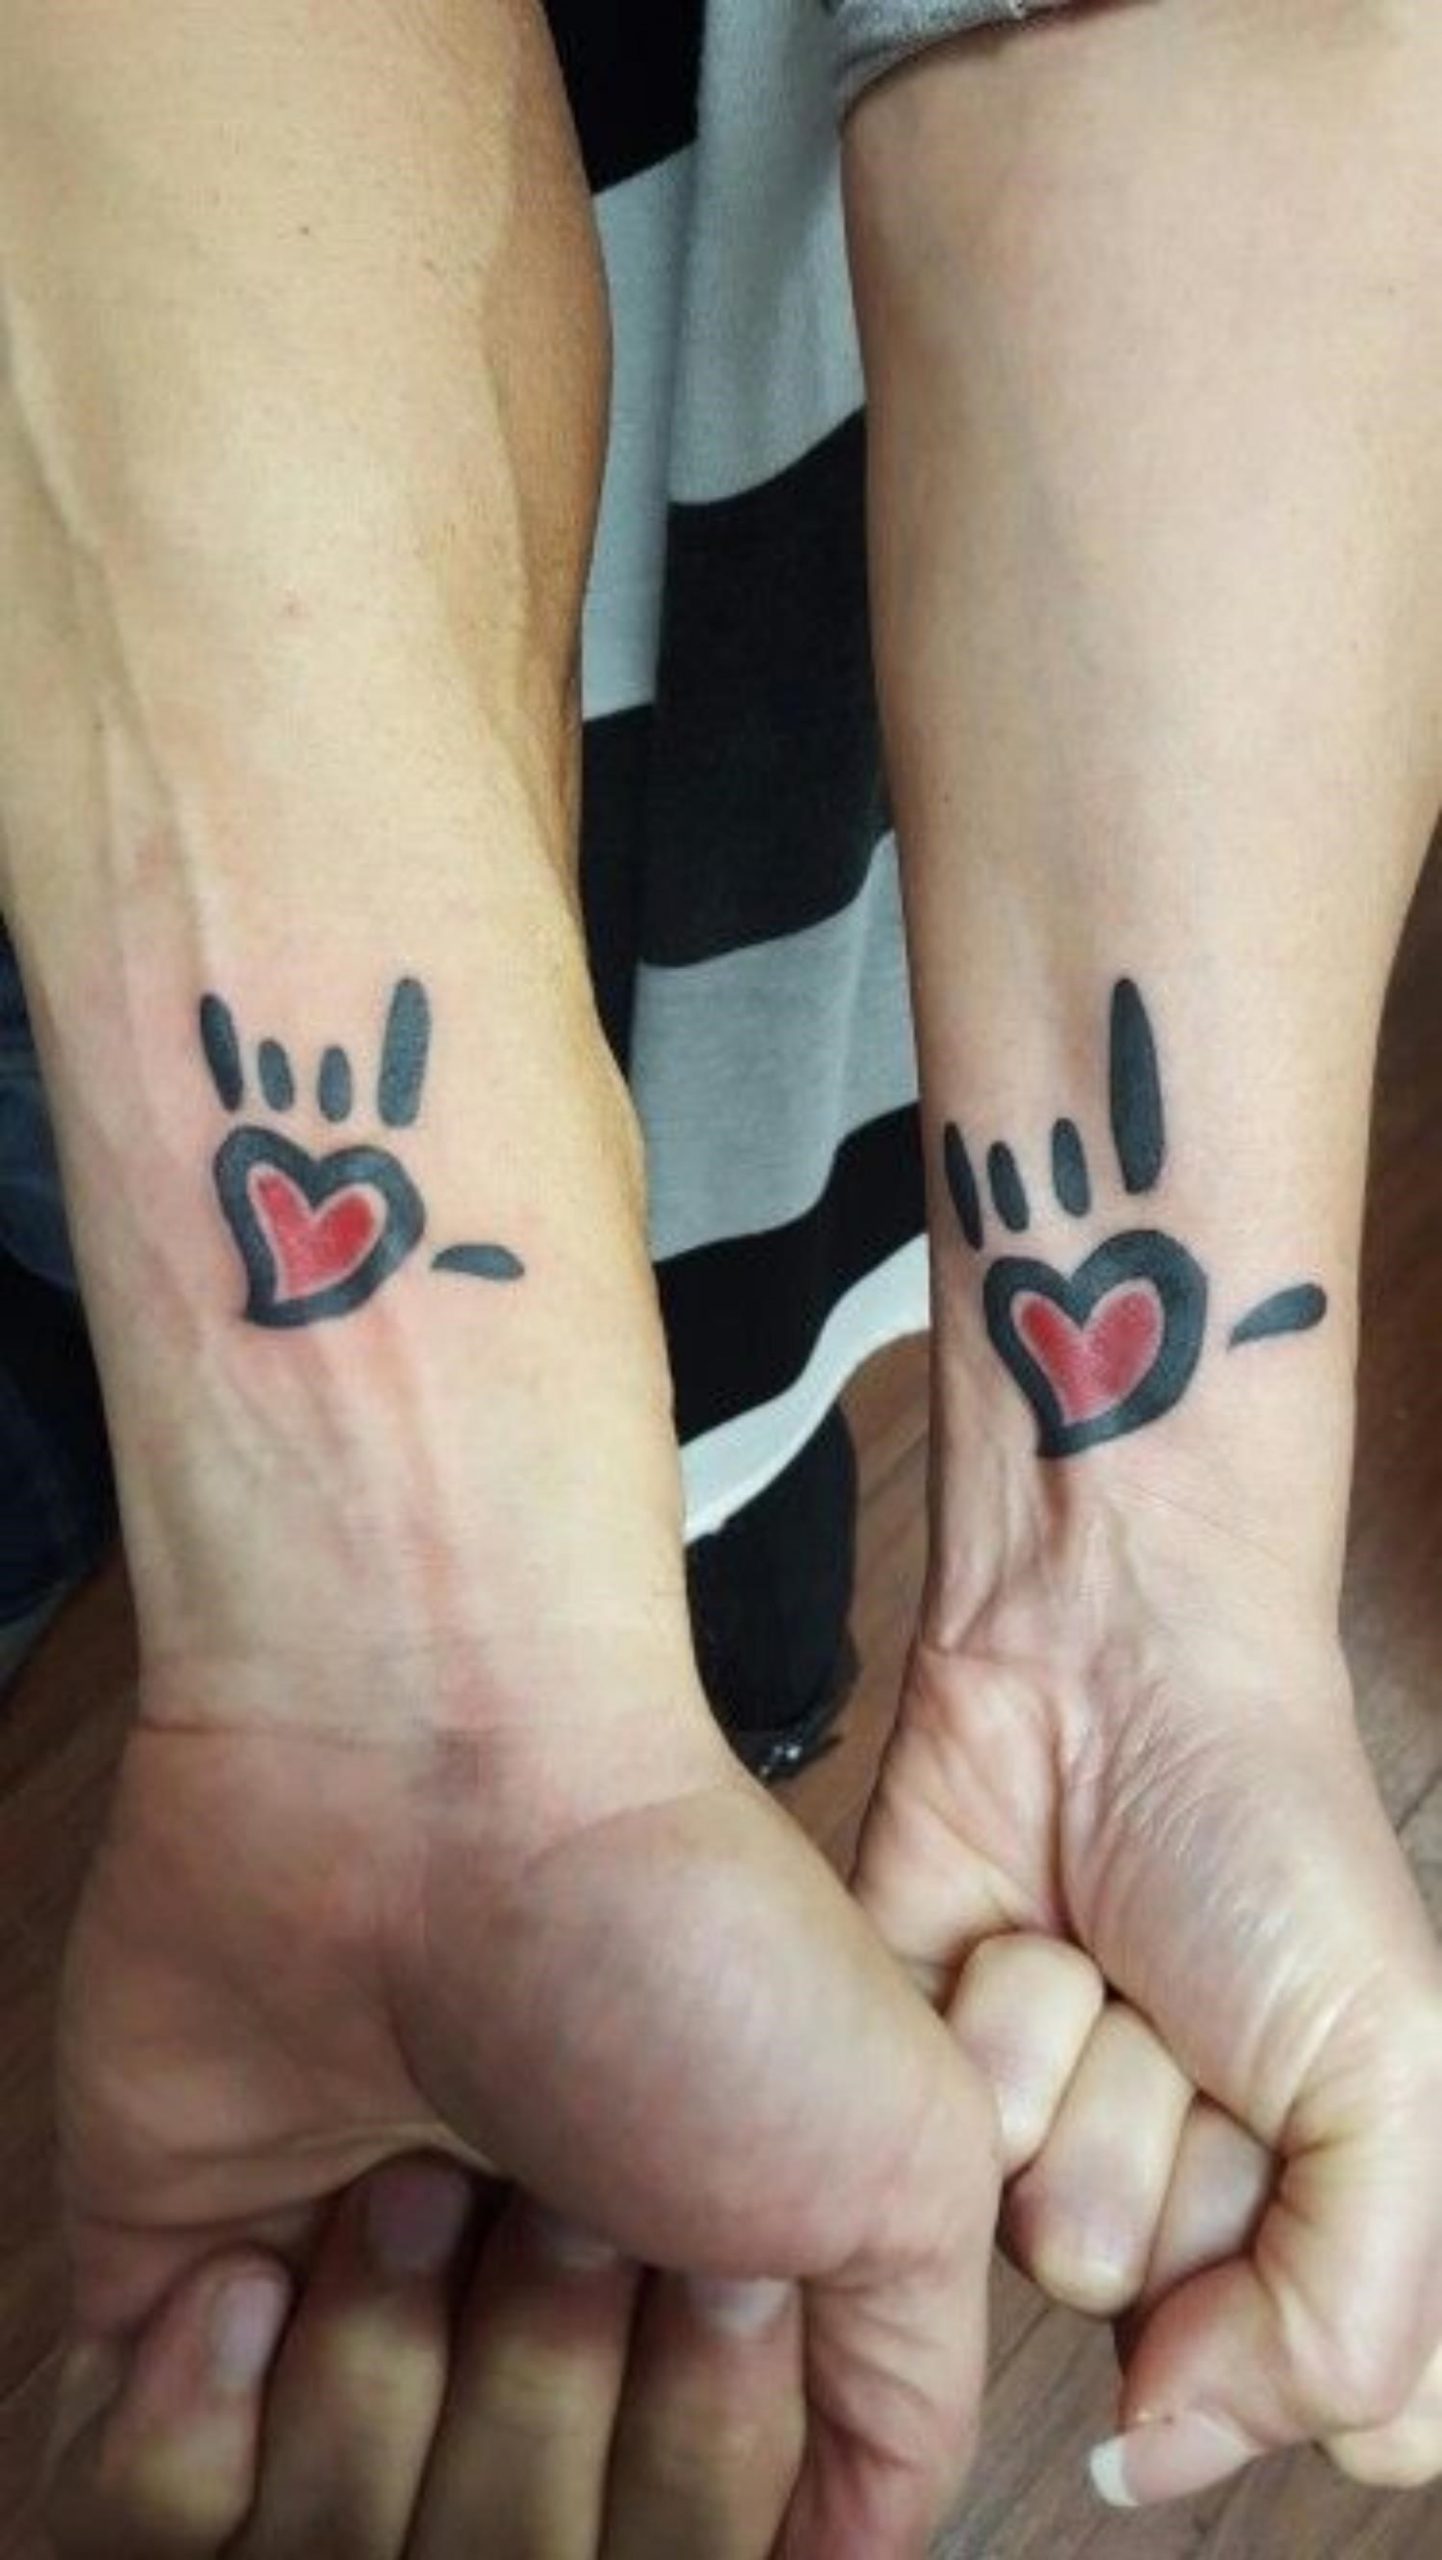 22 Horrible Tattoos On People Who Made Bad Life Choices | Know Your Meme